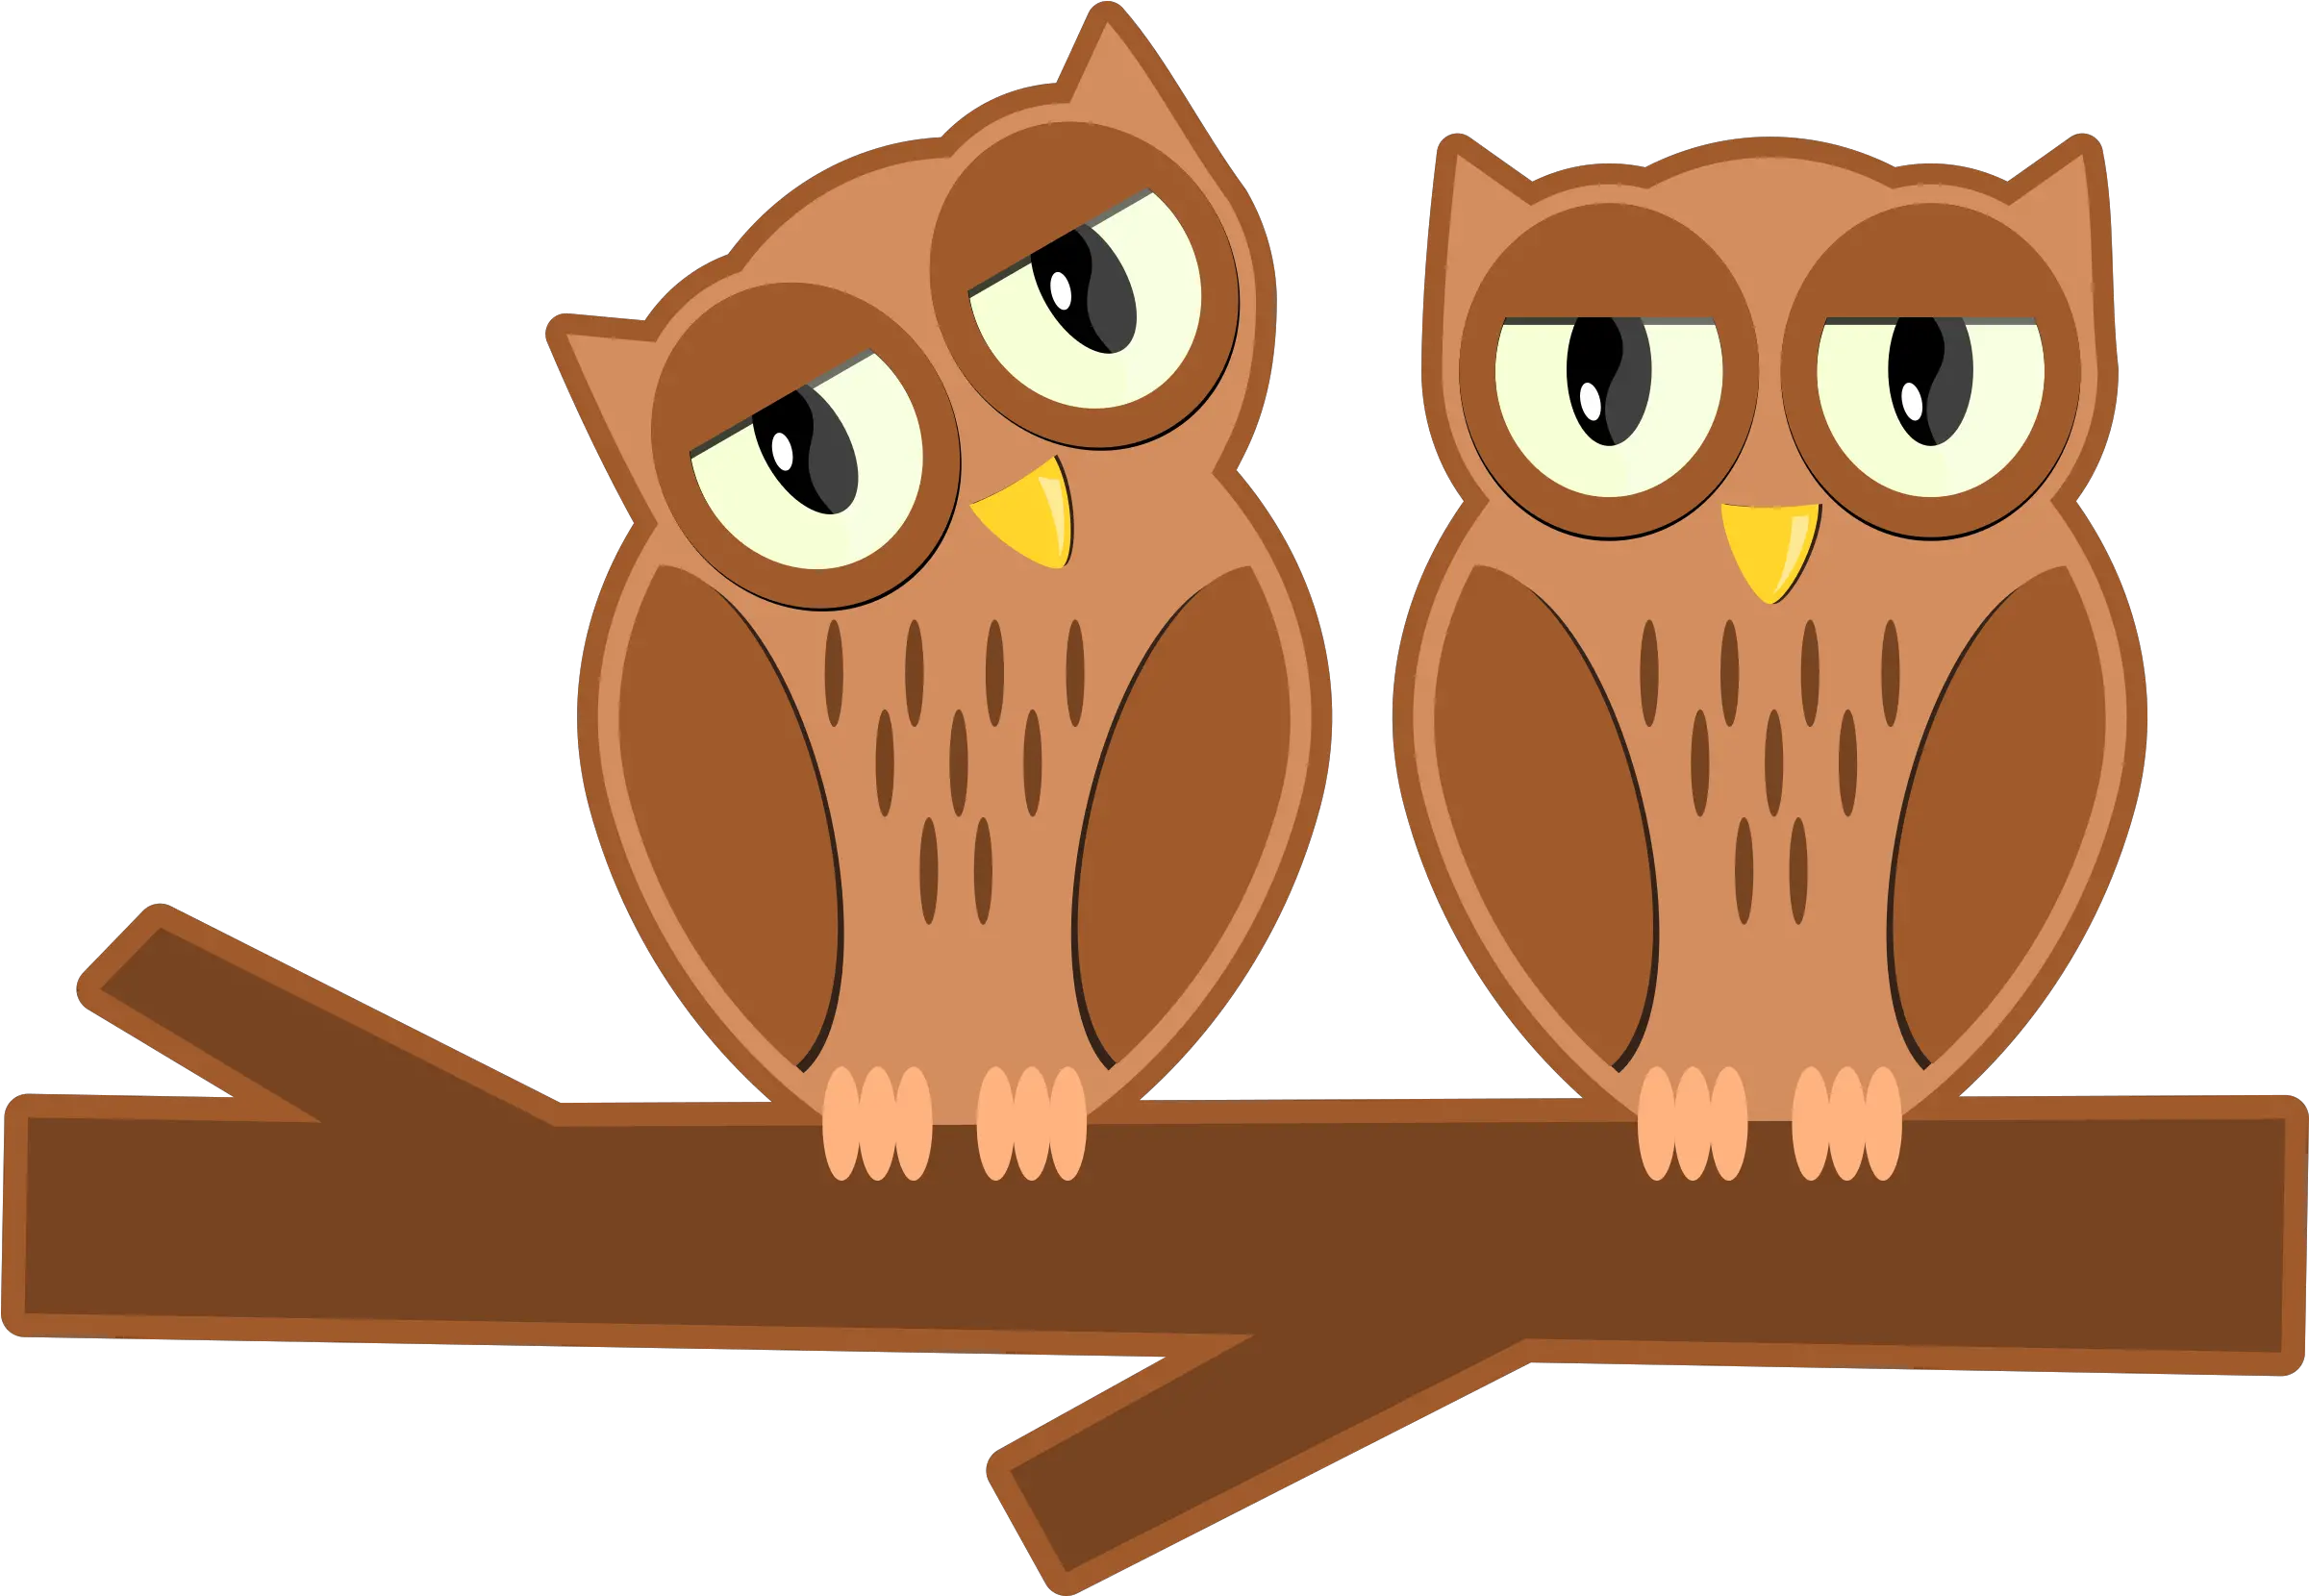 Download Hd Big Image Orange Owl On Branch Clipart Owl On A Bracnh Cartoon Png Branch Clipart Png